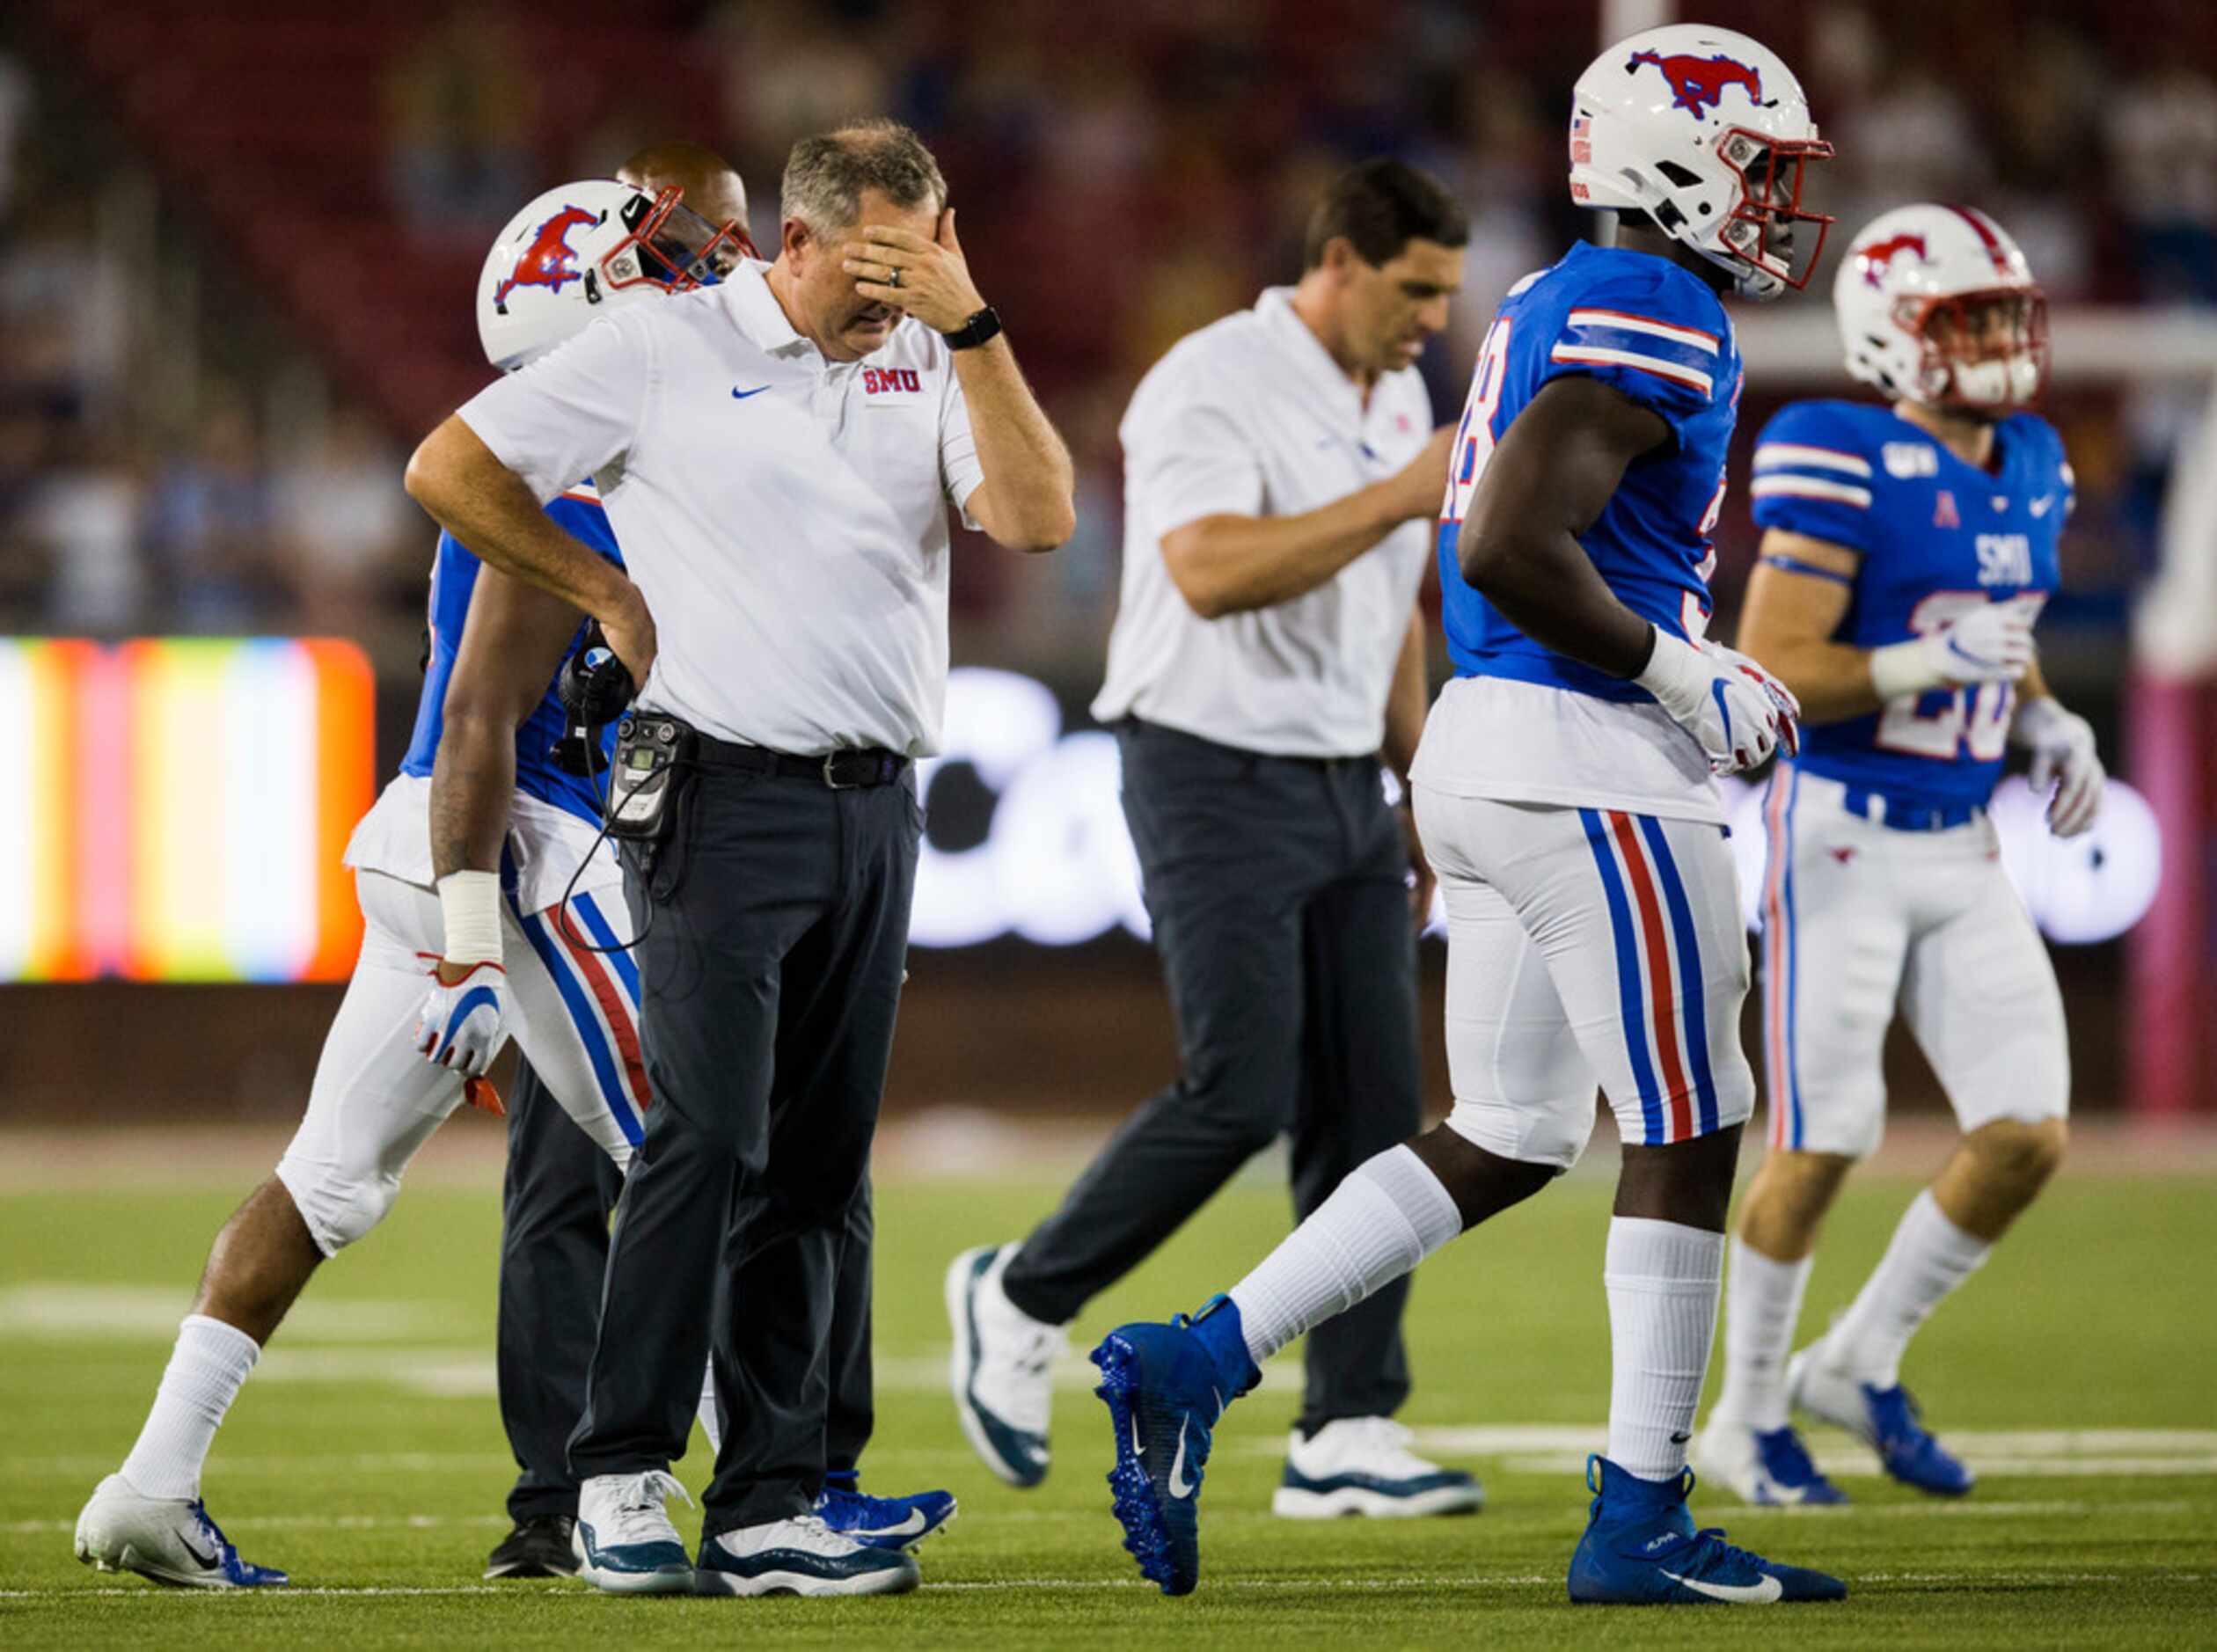 SMU Mustangs head coach Sonny Dykes puts his hand to his forehead during a timeout in double...